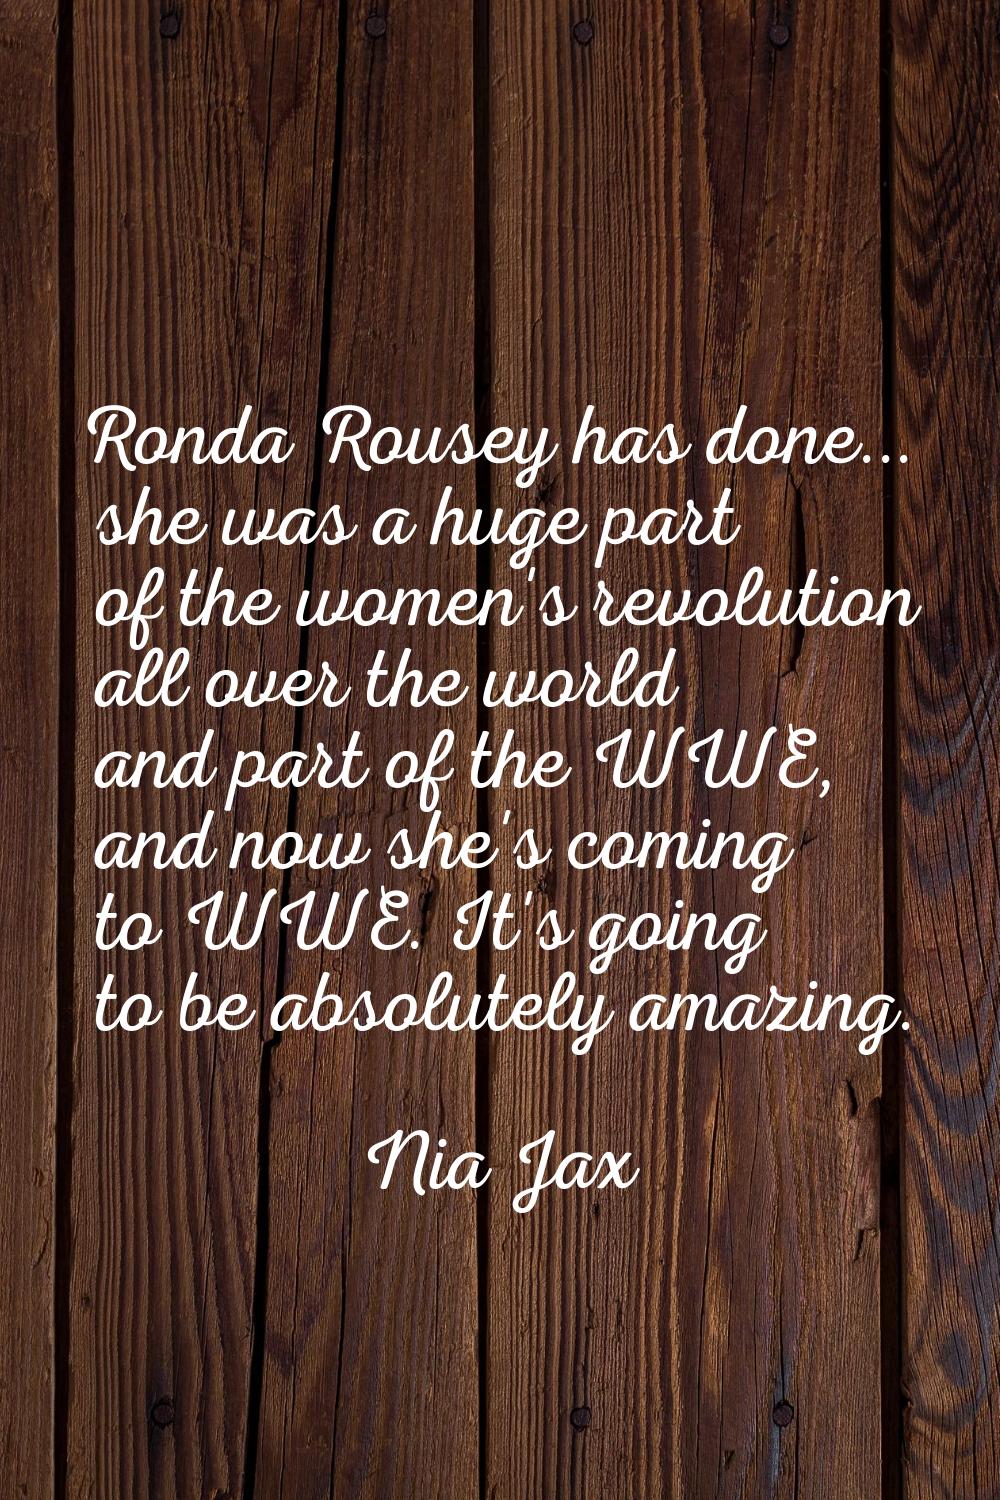 Ronda Rousey has done... she was a huge part of the women's revolution all over the world and part 